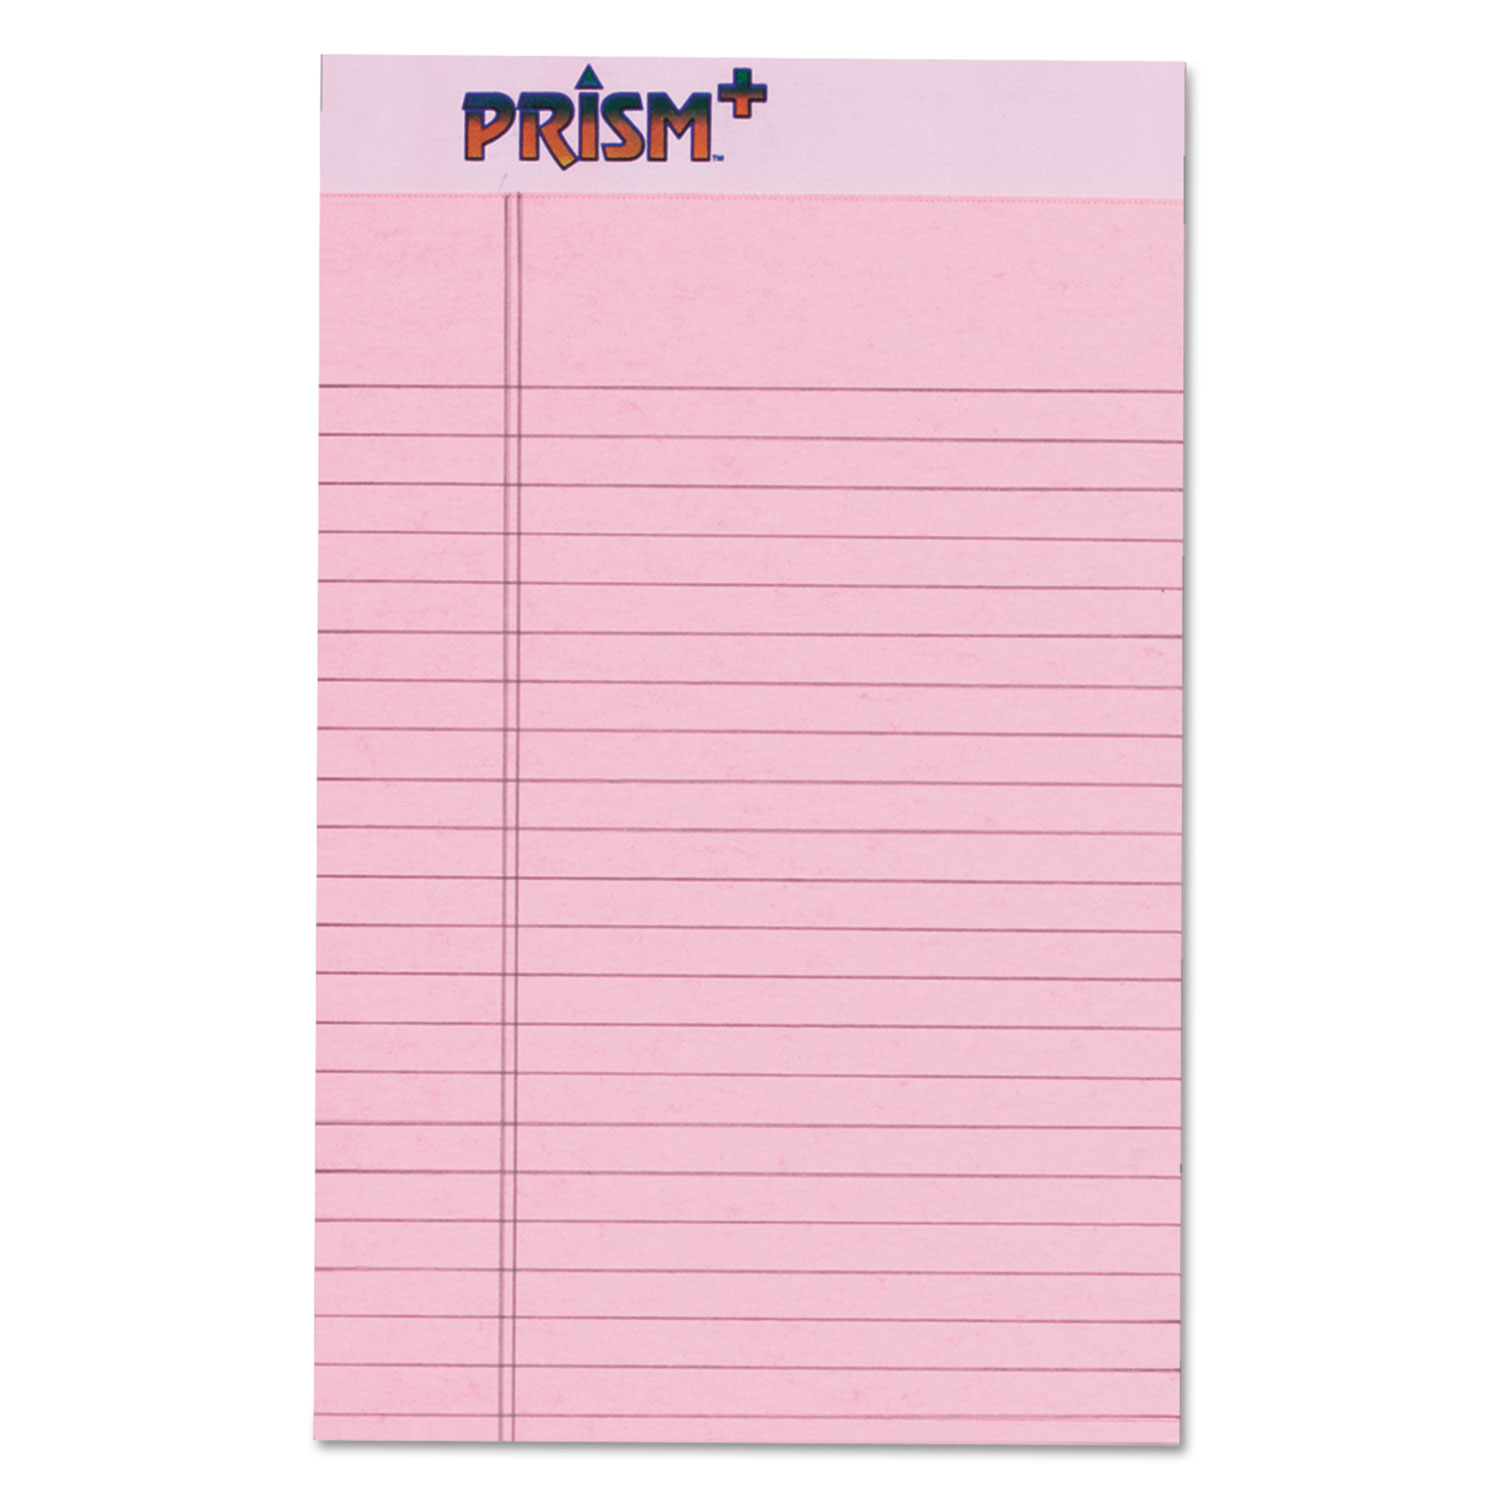  TOPS 63050 Prism + Writing Pads, Narrow Rule, 5 x 8, Pastel Pink, 50 Sheets, 12/Pack (TOP63050) 